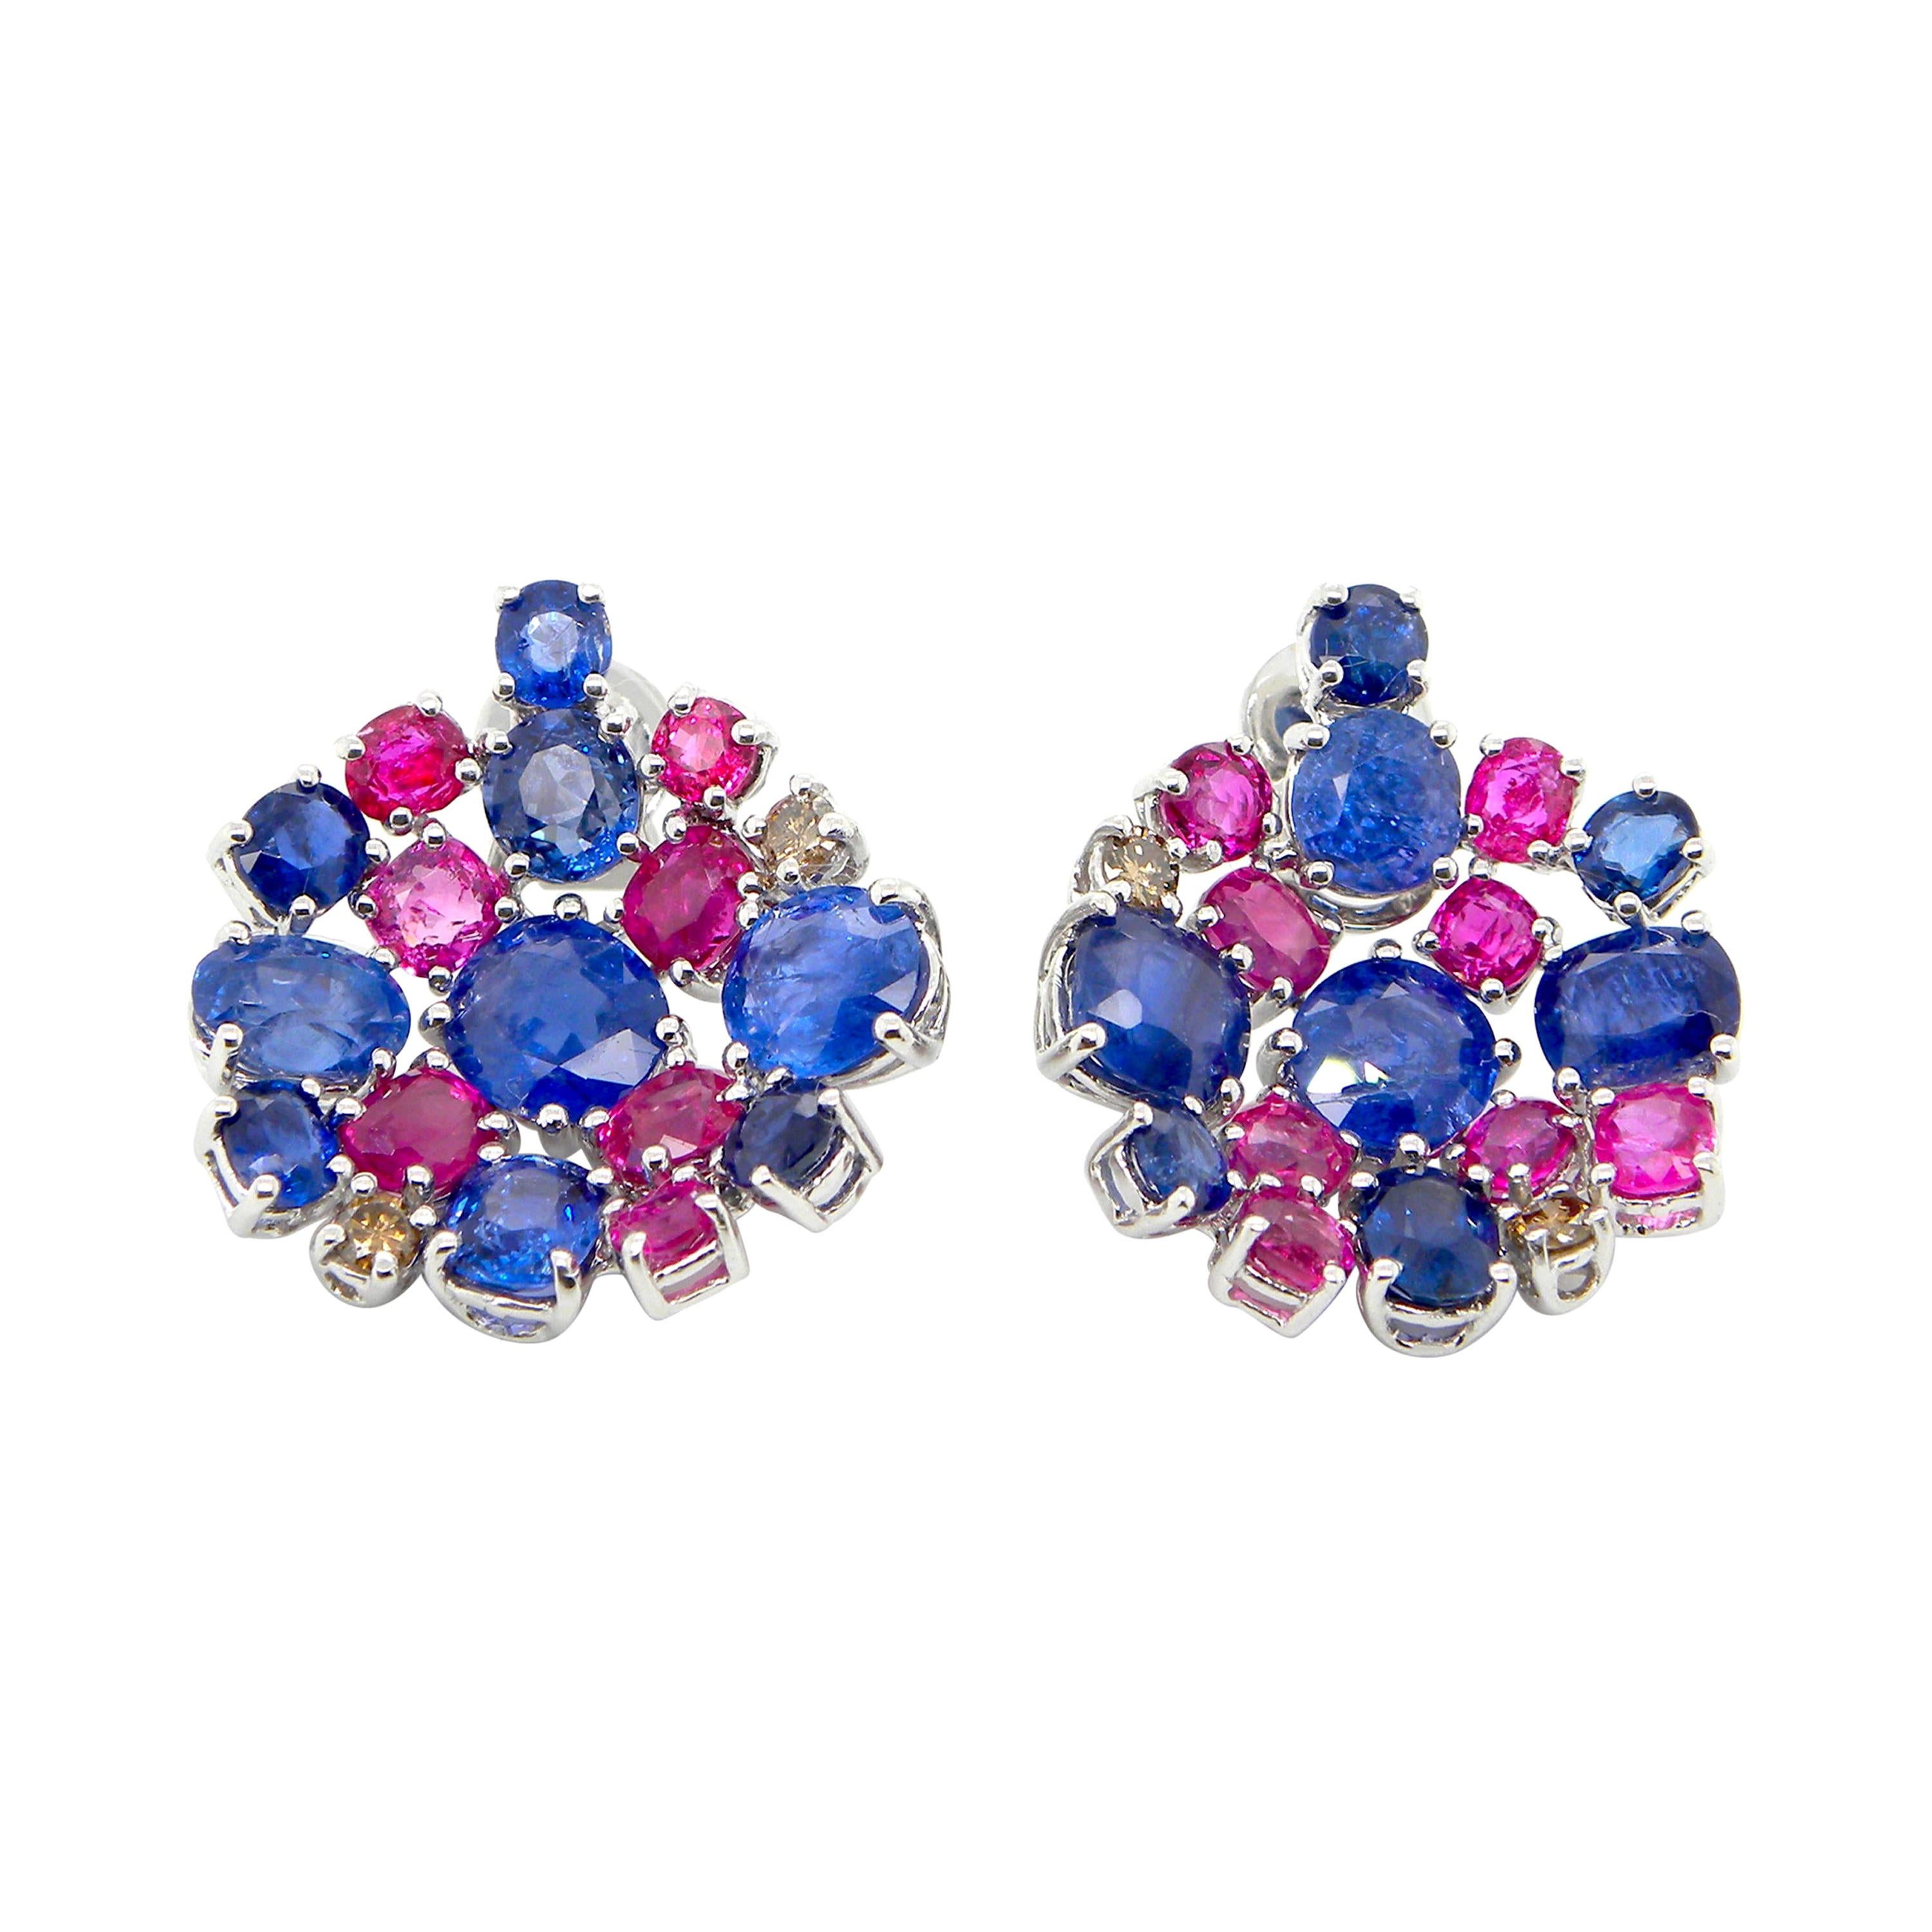 15.4 Carat Unheated Burmese Ruby and Blue Sapphire White Gold Cluster Earrings